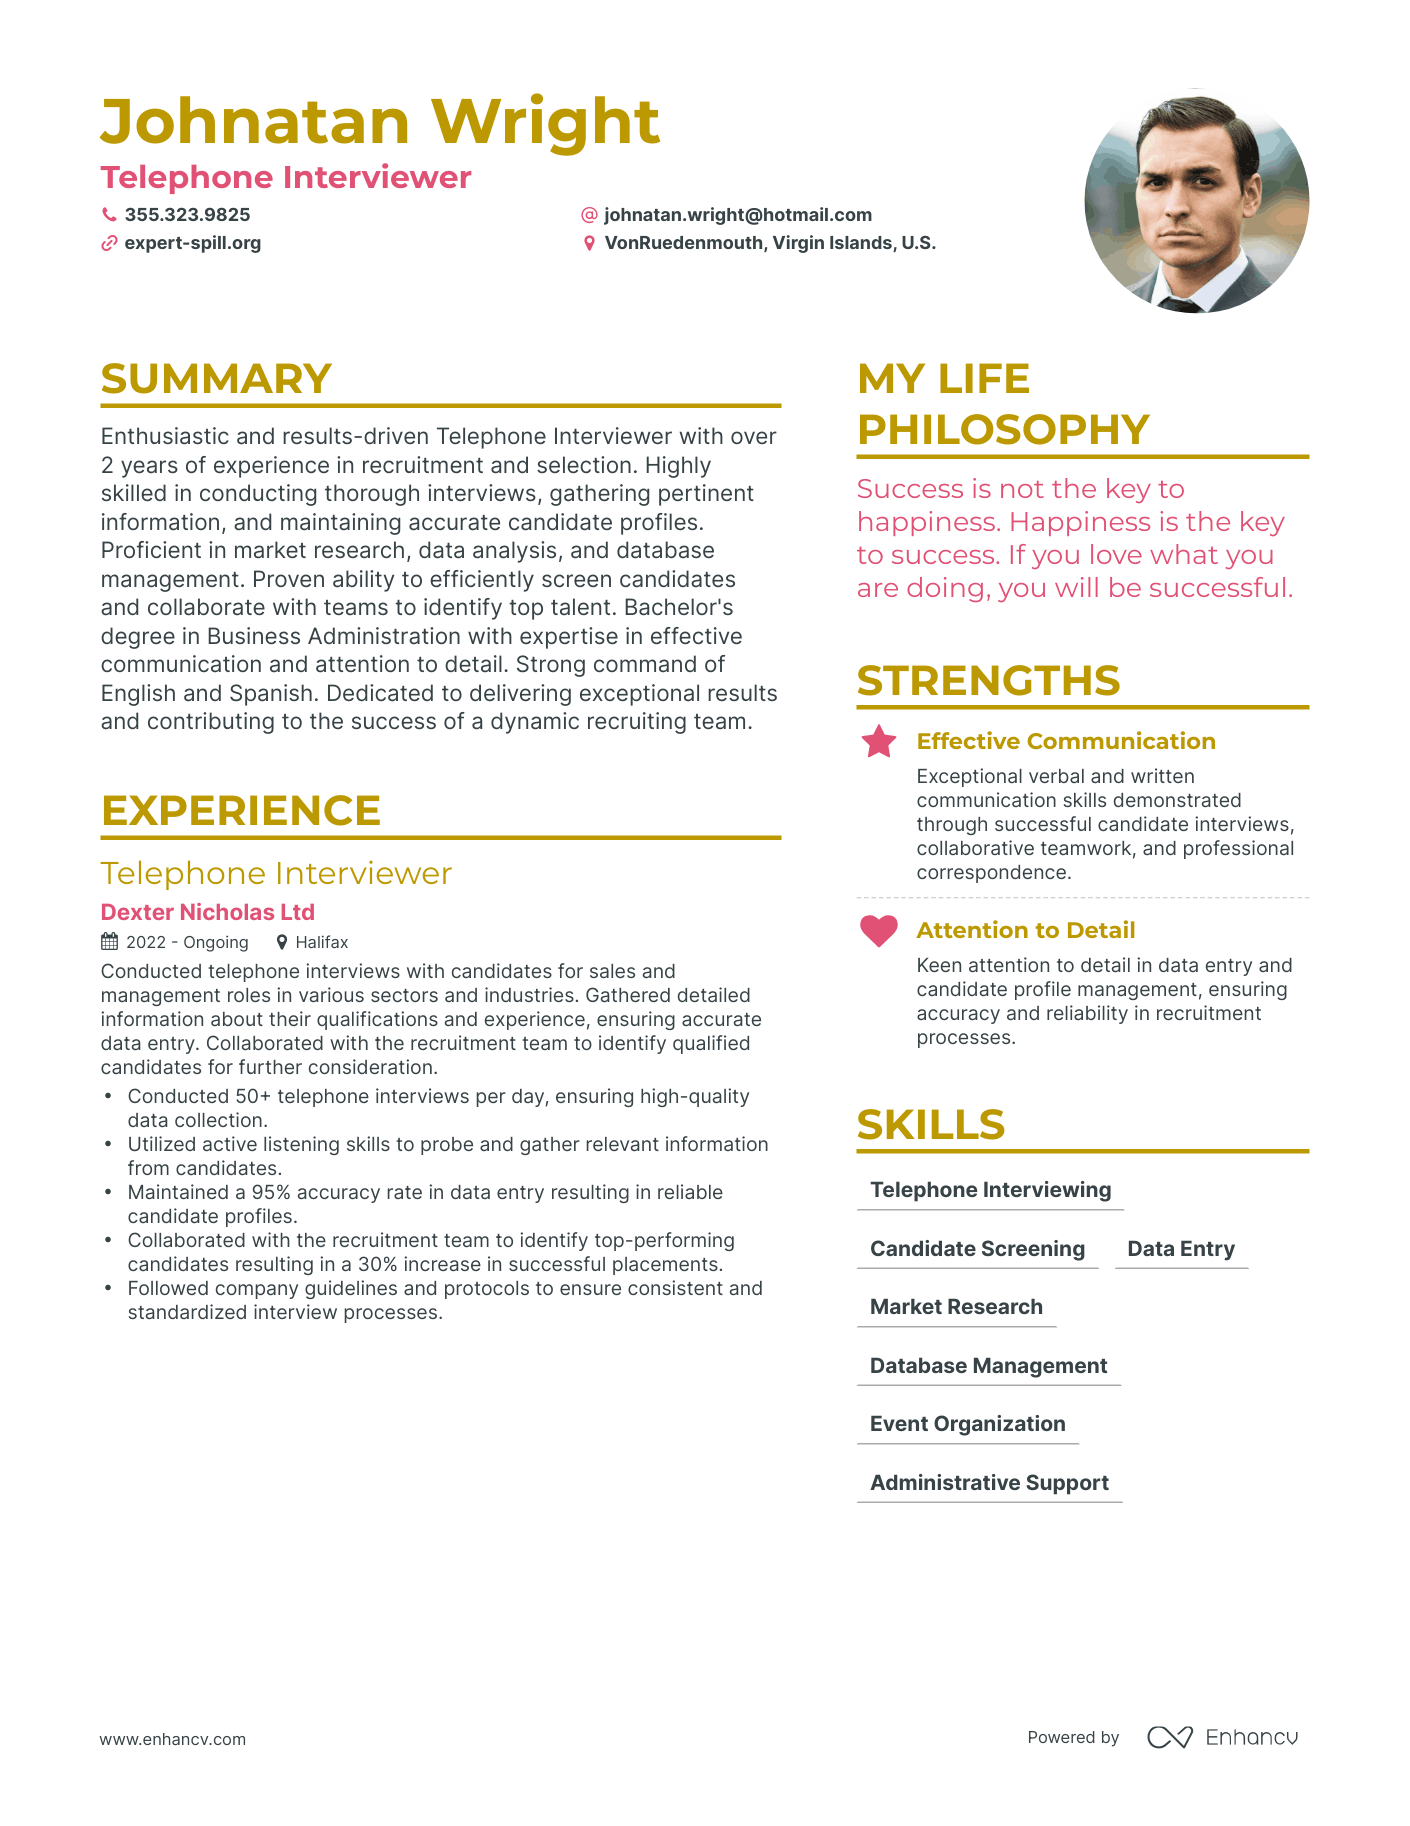 Telephone Interviewer resume example